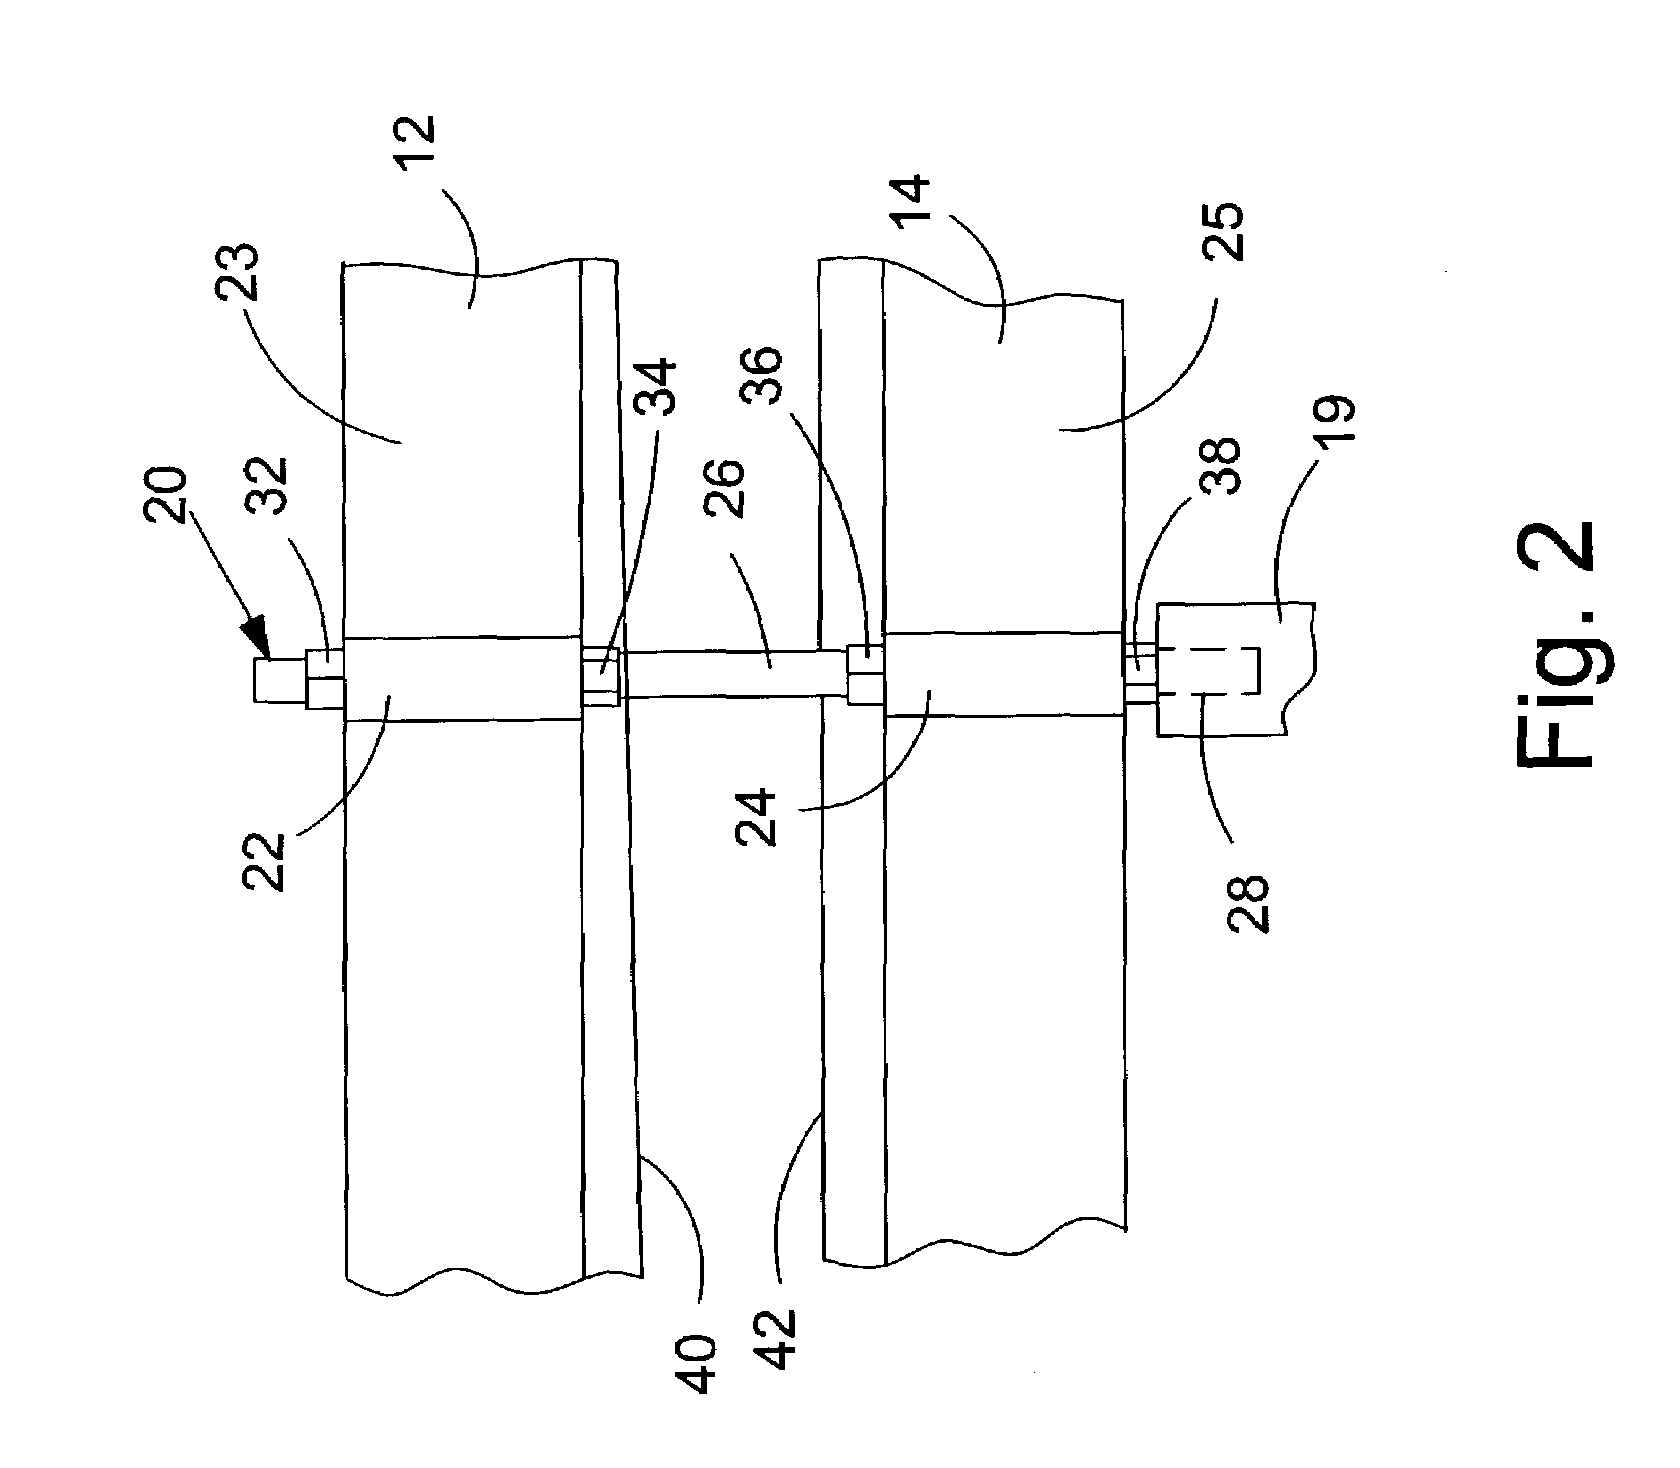 Apparatus and method for forming food products by gradual compression